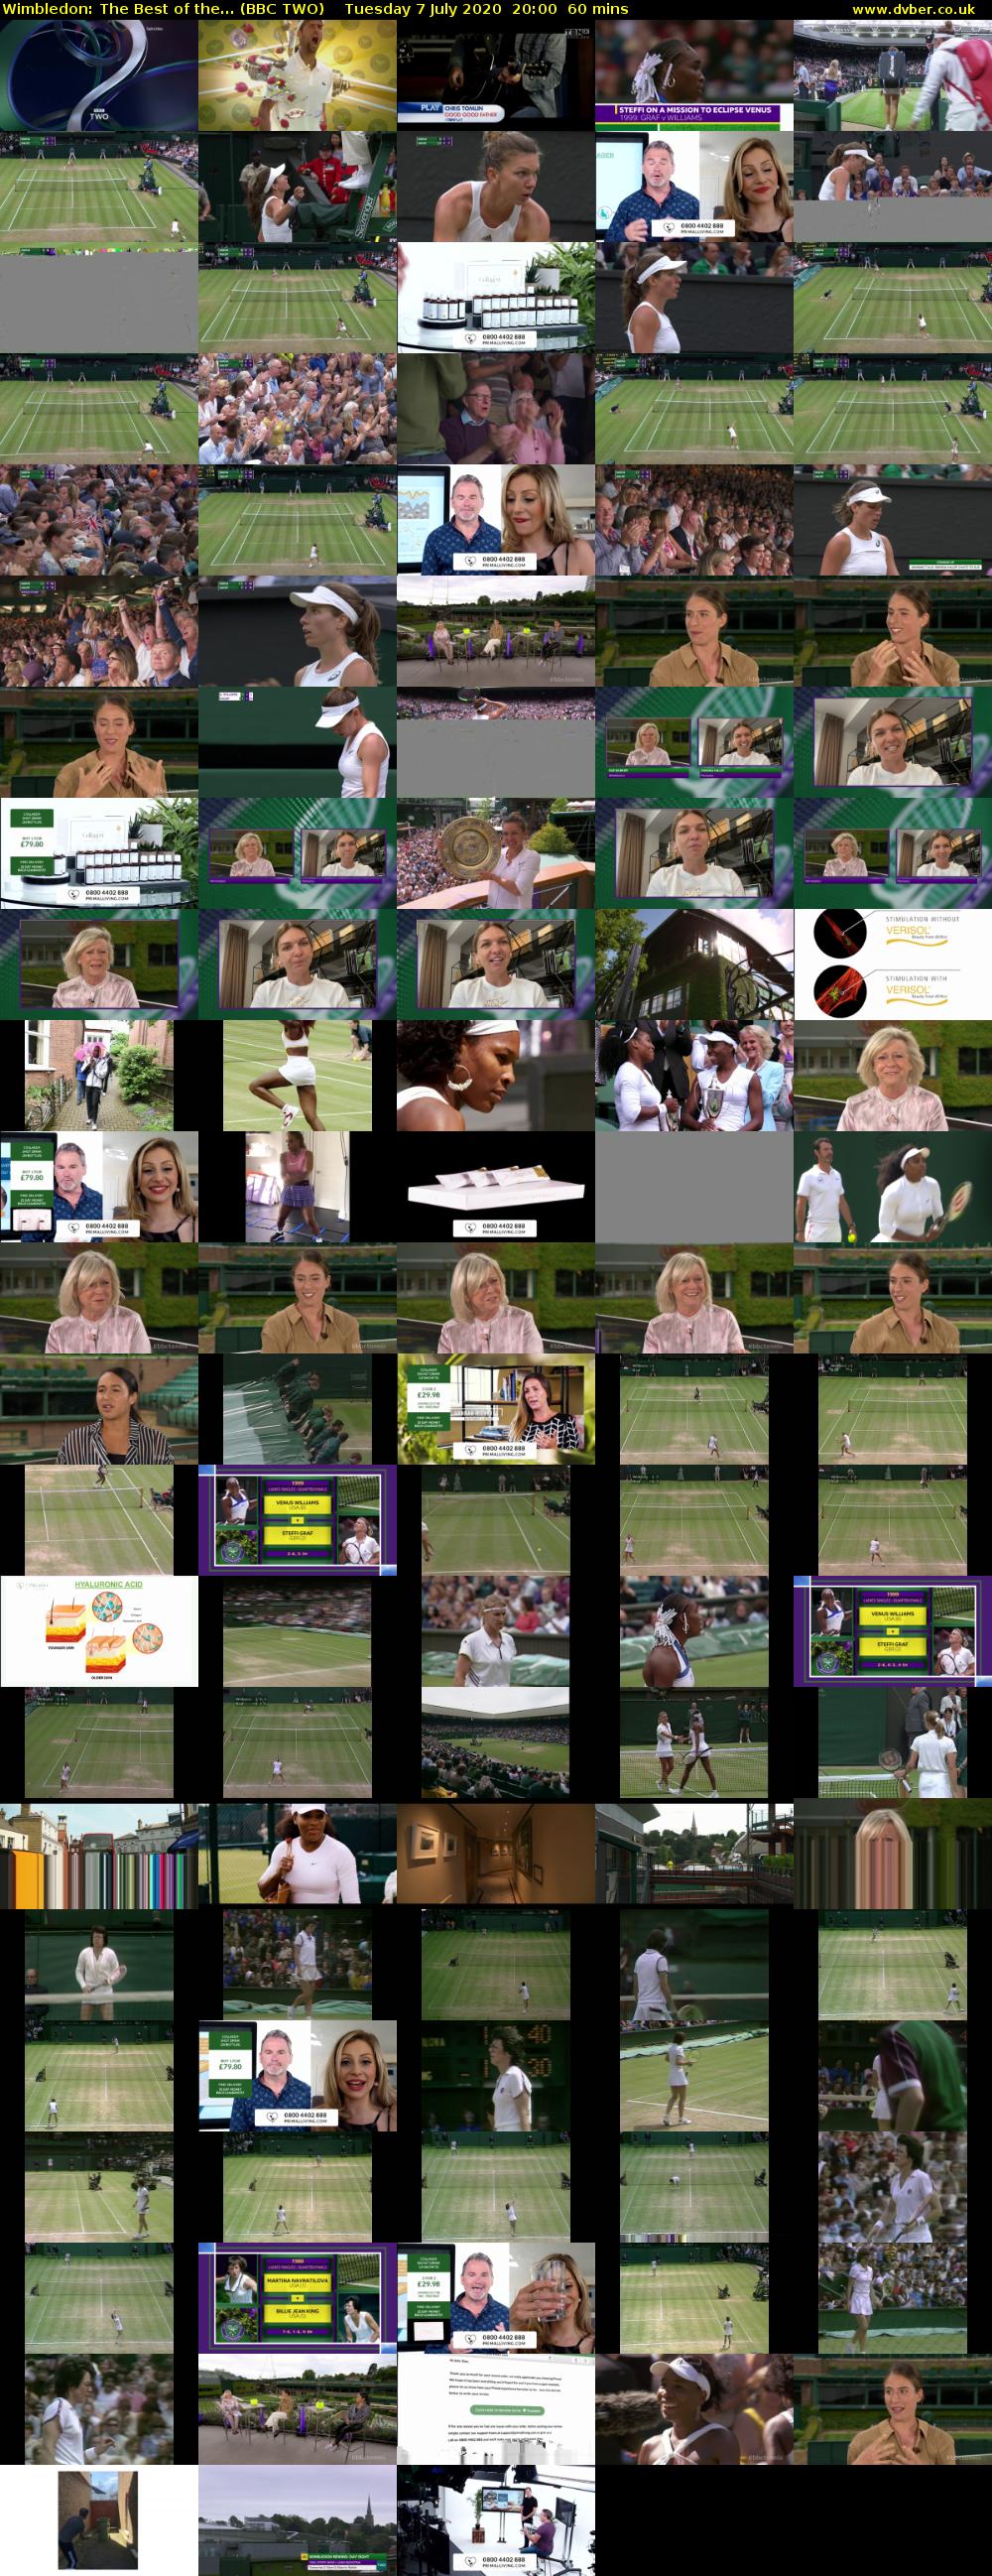 Wimbledon: The Best of the... (BBC TWO) Tuesday 7 July 2020 20:00 - 21:00